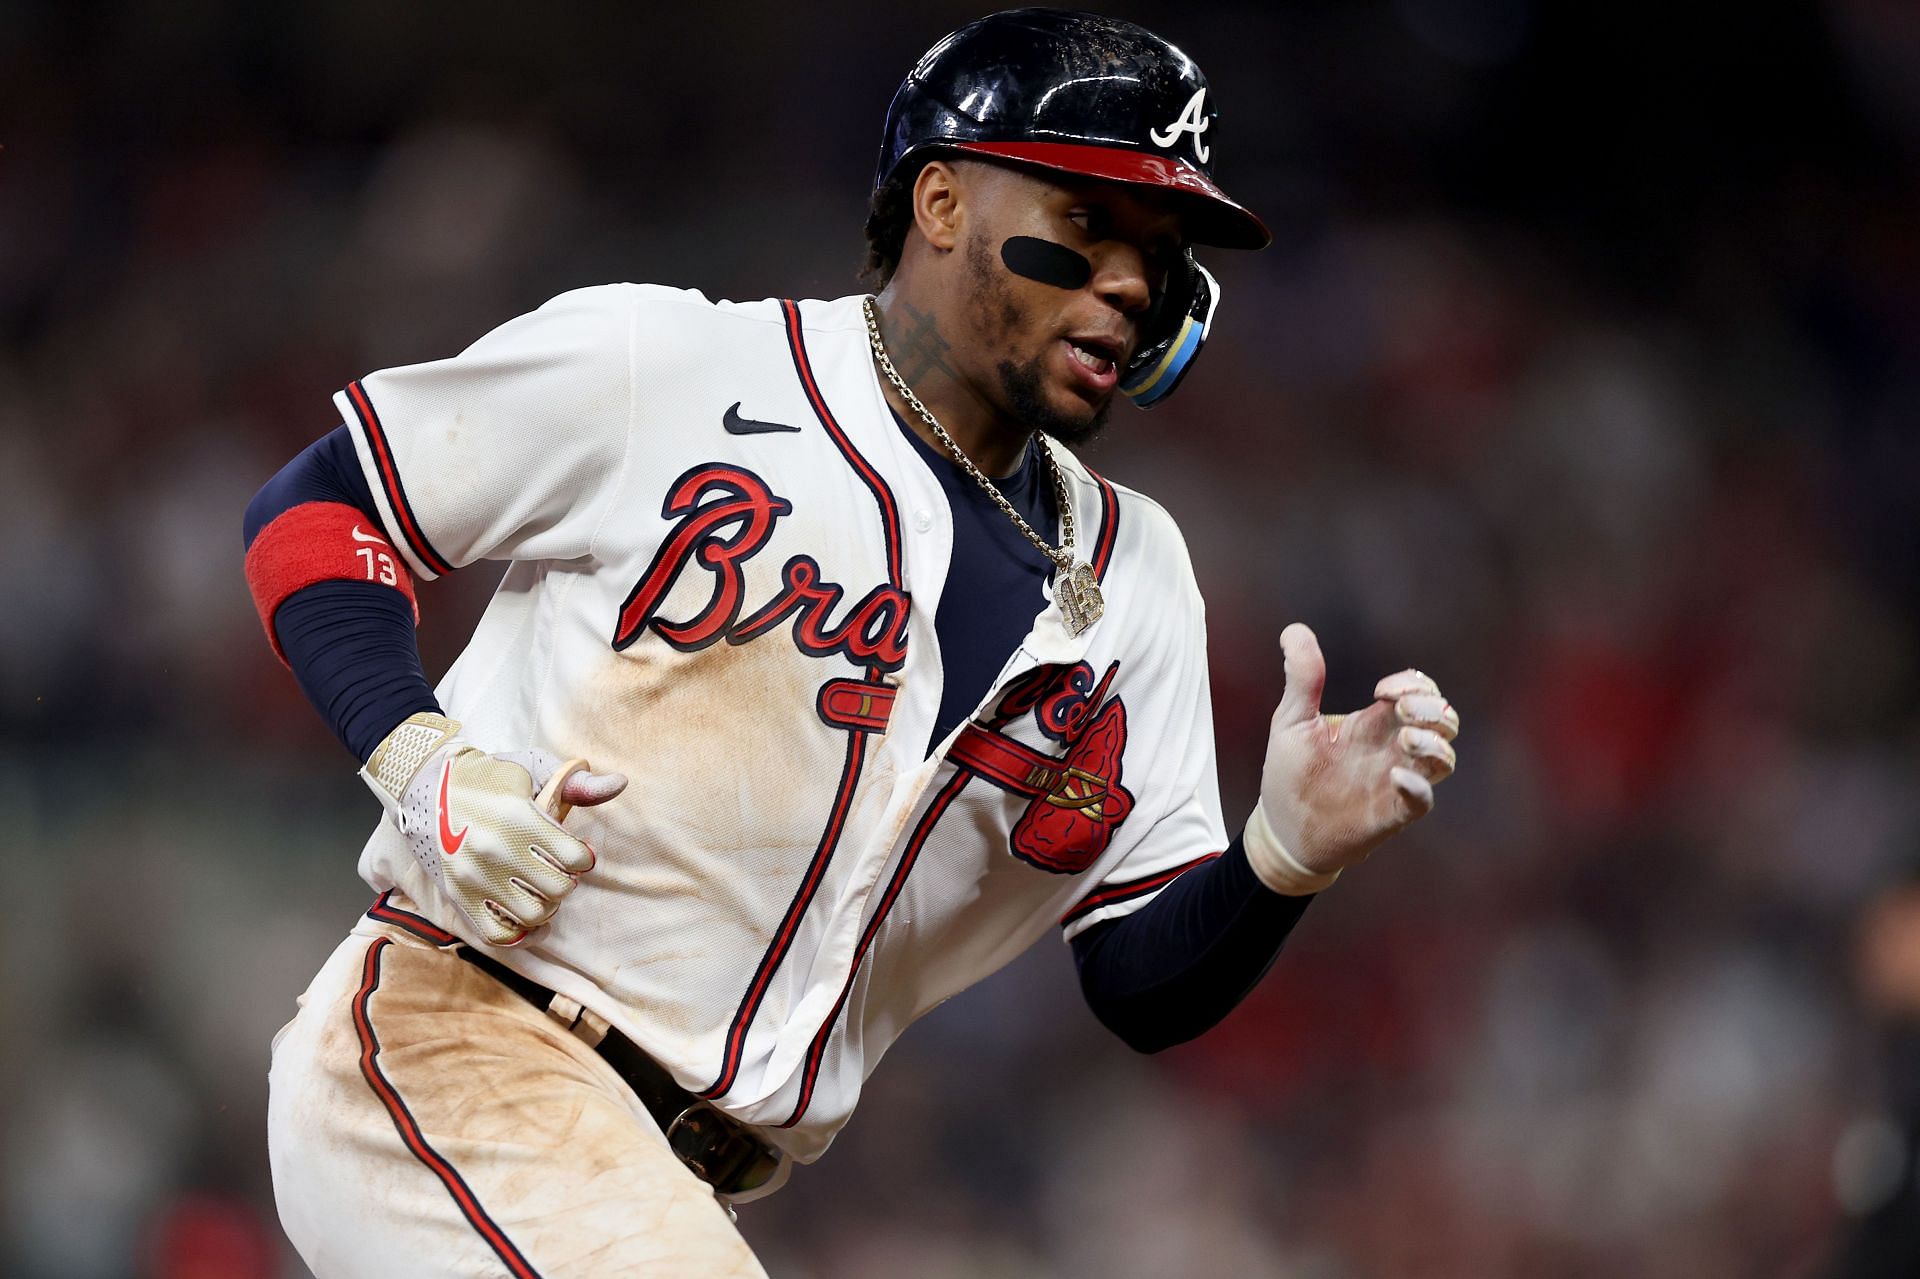 Ronald Acuna Jr. Salary: How much will the Atlanta Braves star earn in 2023?